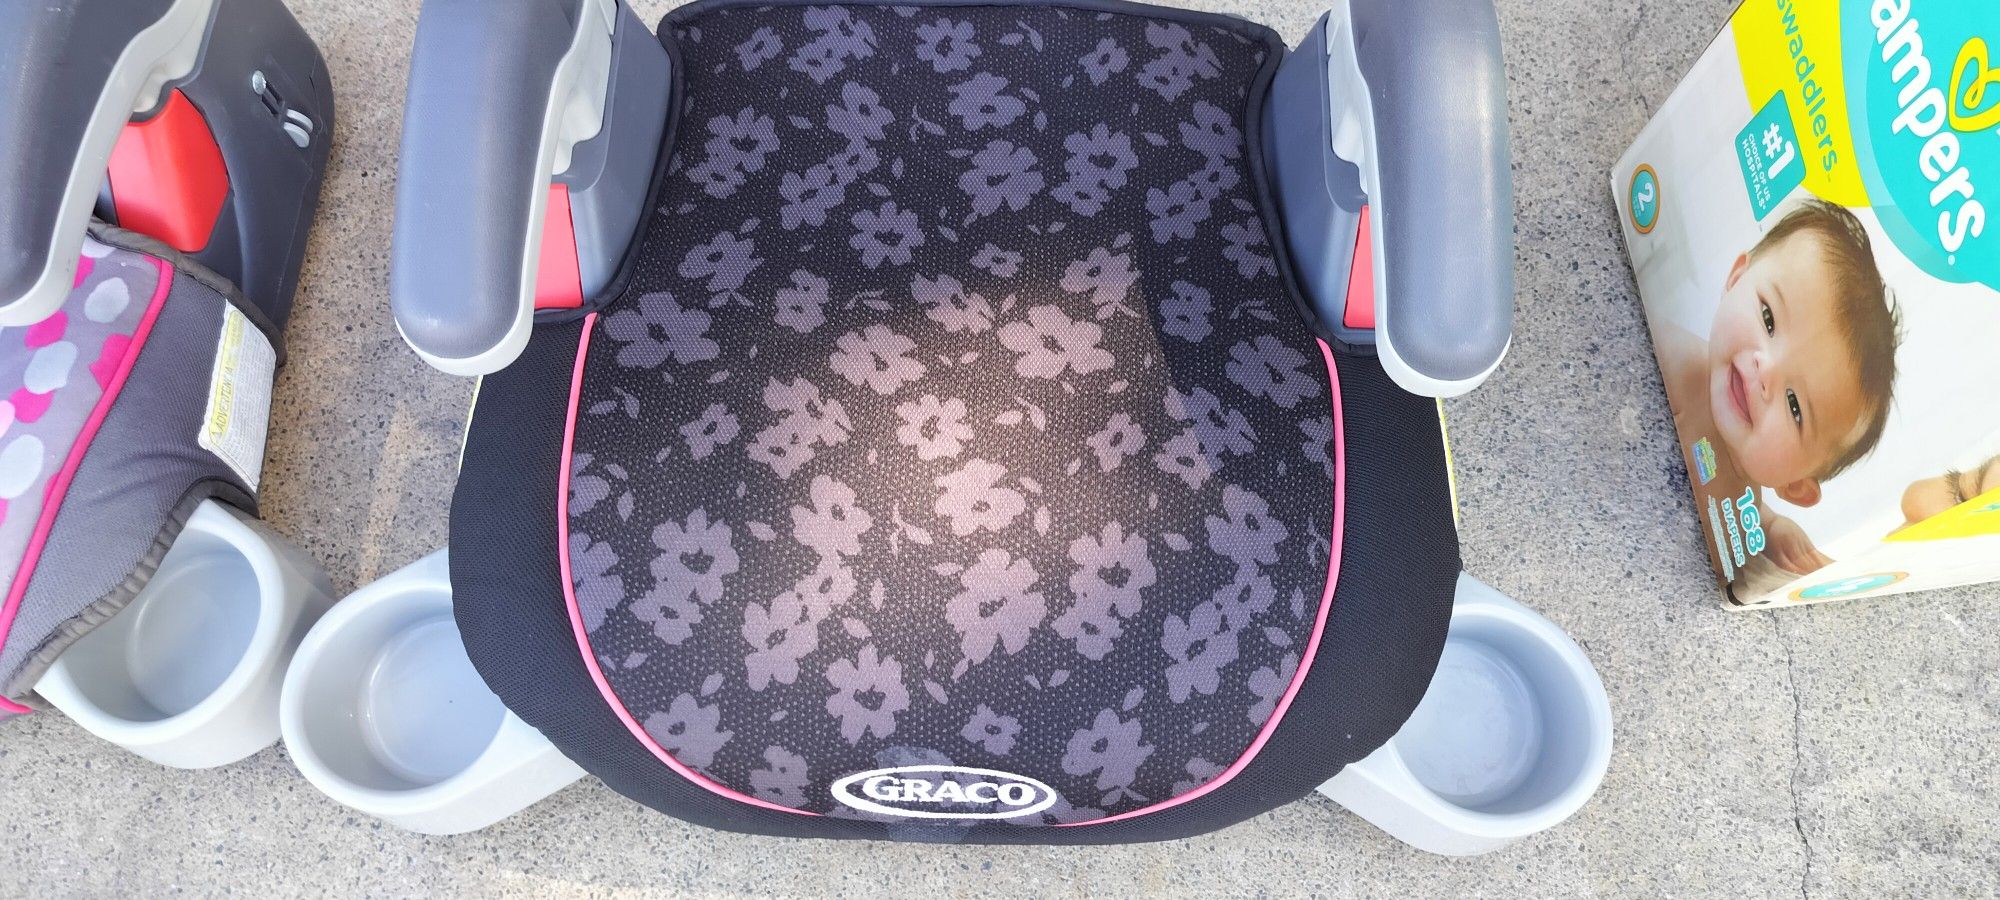 Booster Seat $18 Pick Up Only Bonanza and Lamb 